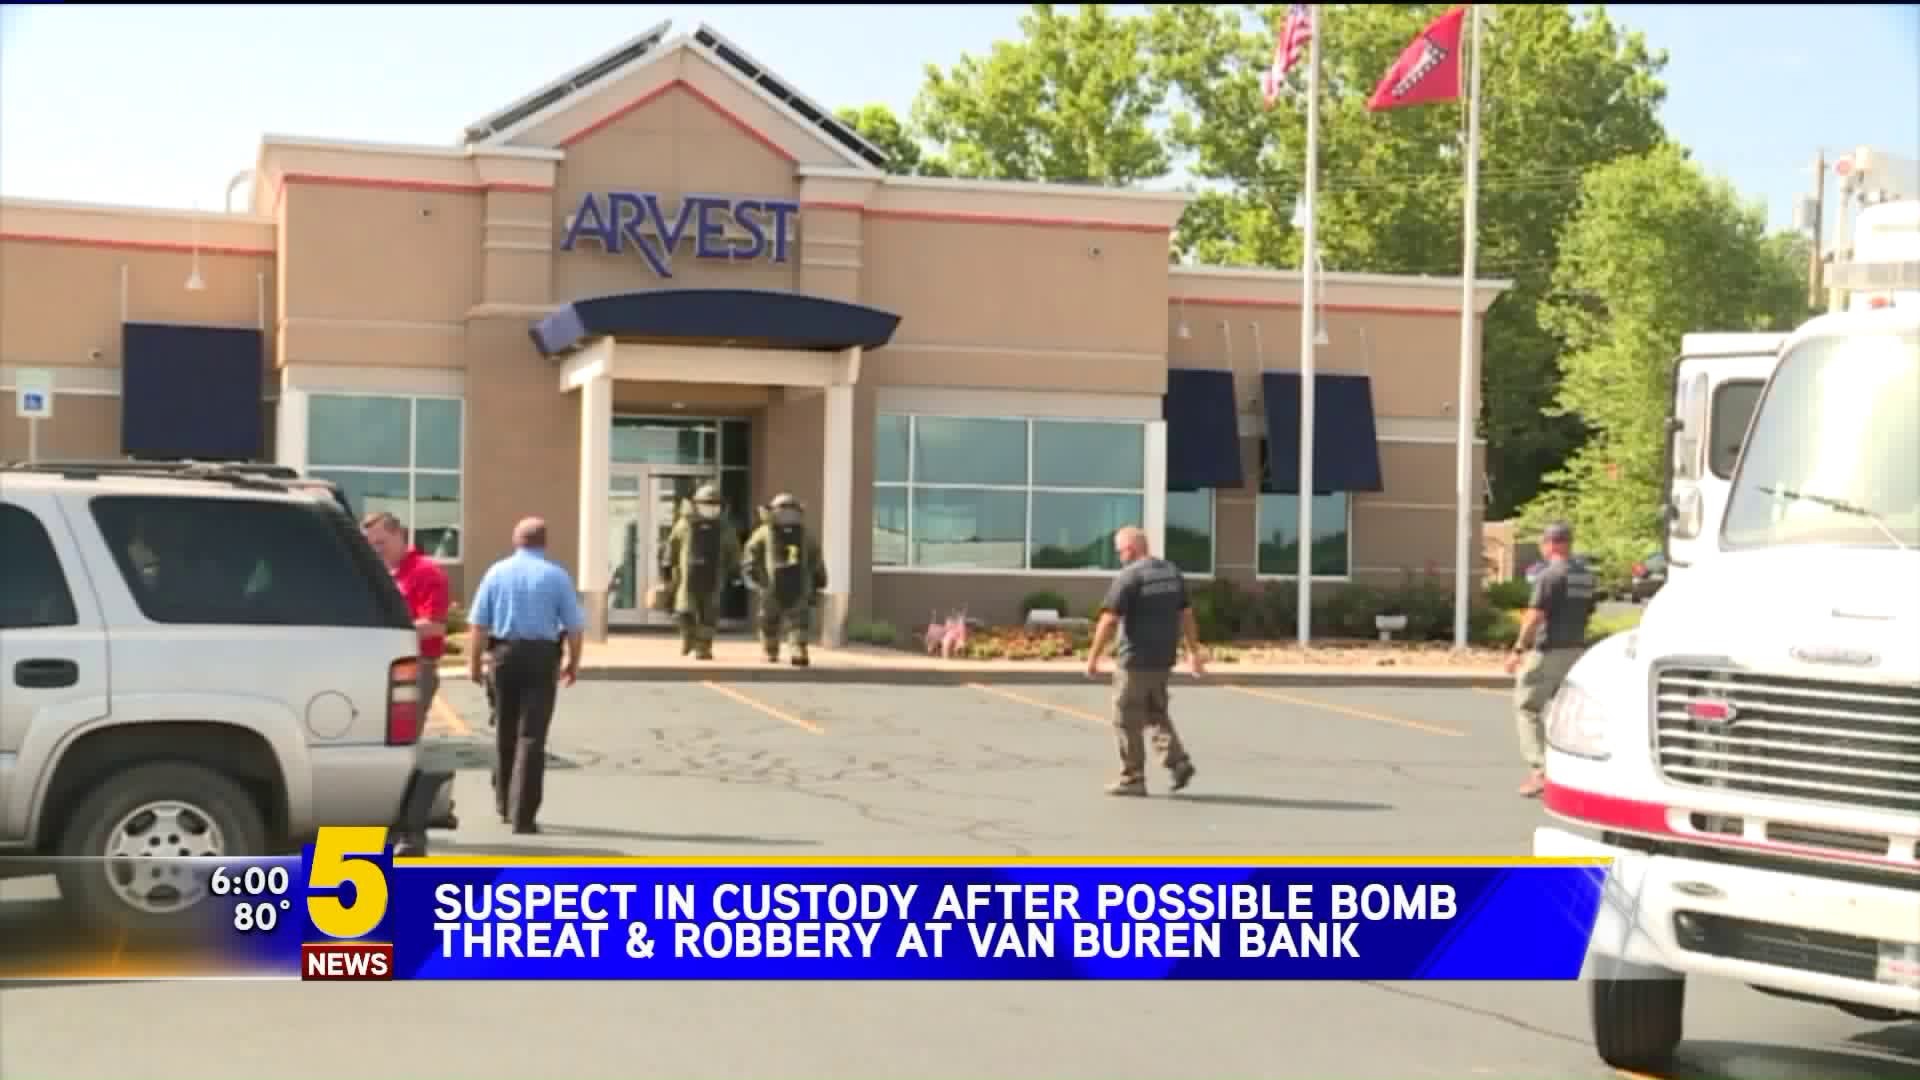 Suspect Arrested in Possible Bomb Threat at Arvest Bank